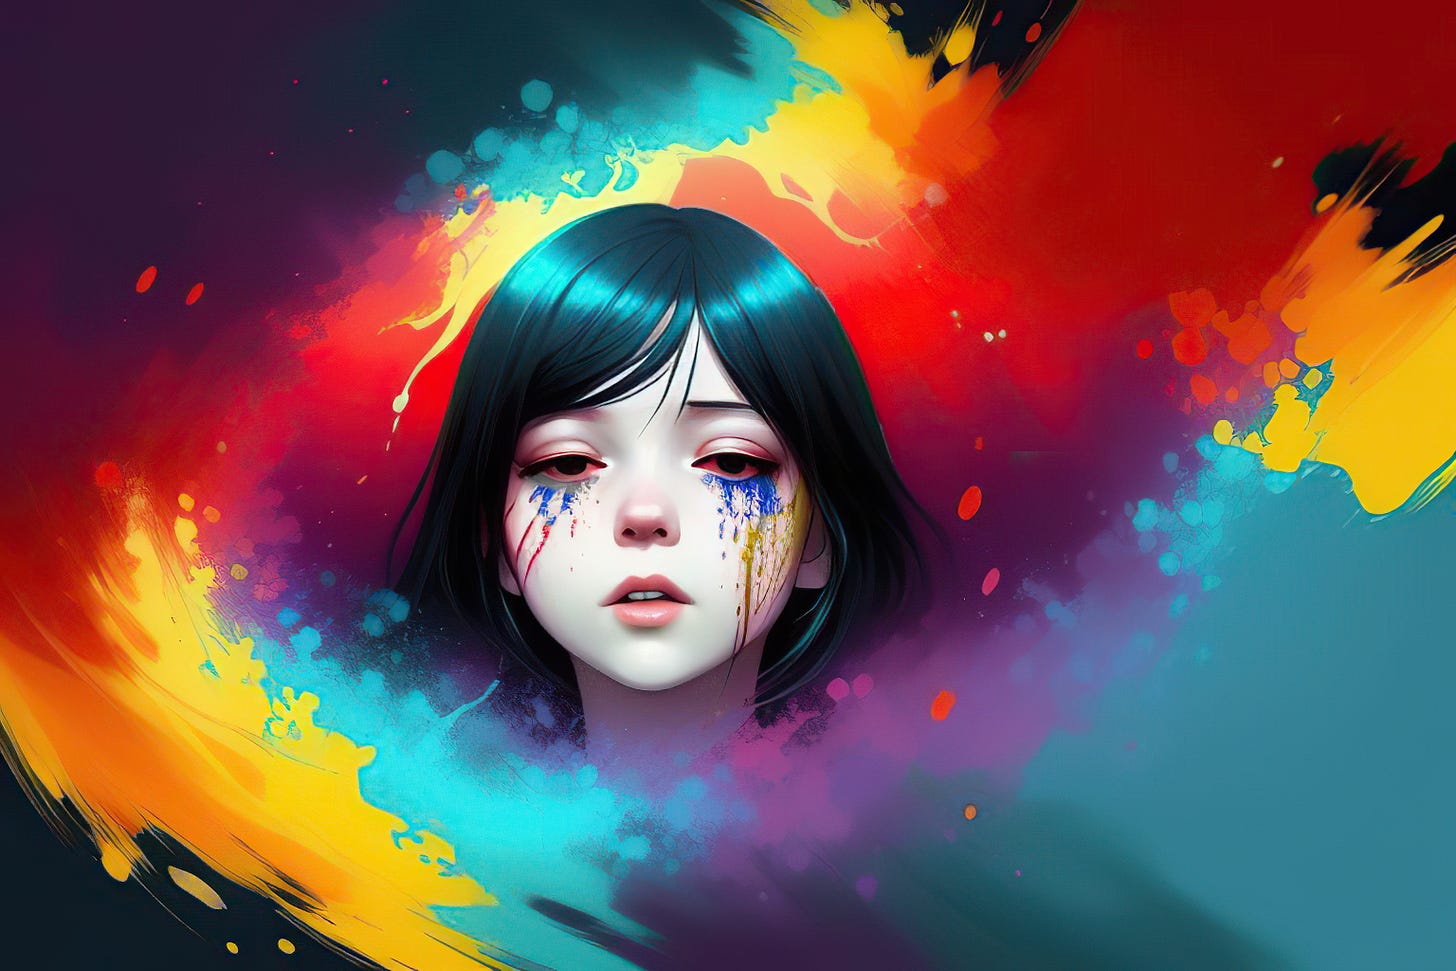 The head of a girl with turquoise hair emerges from a colorful swirl. She cries tears in the colors of the Russian and Ukrainian national flags.